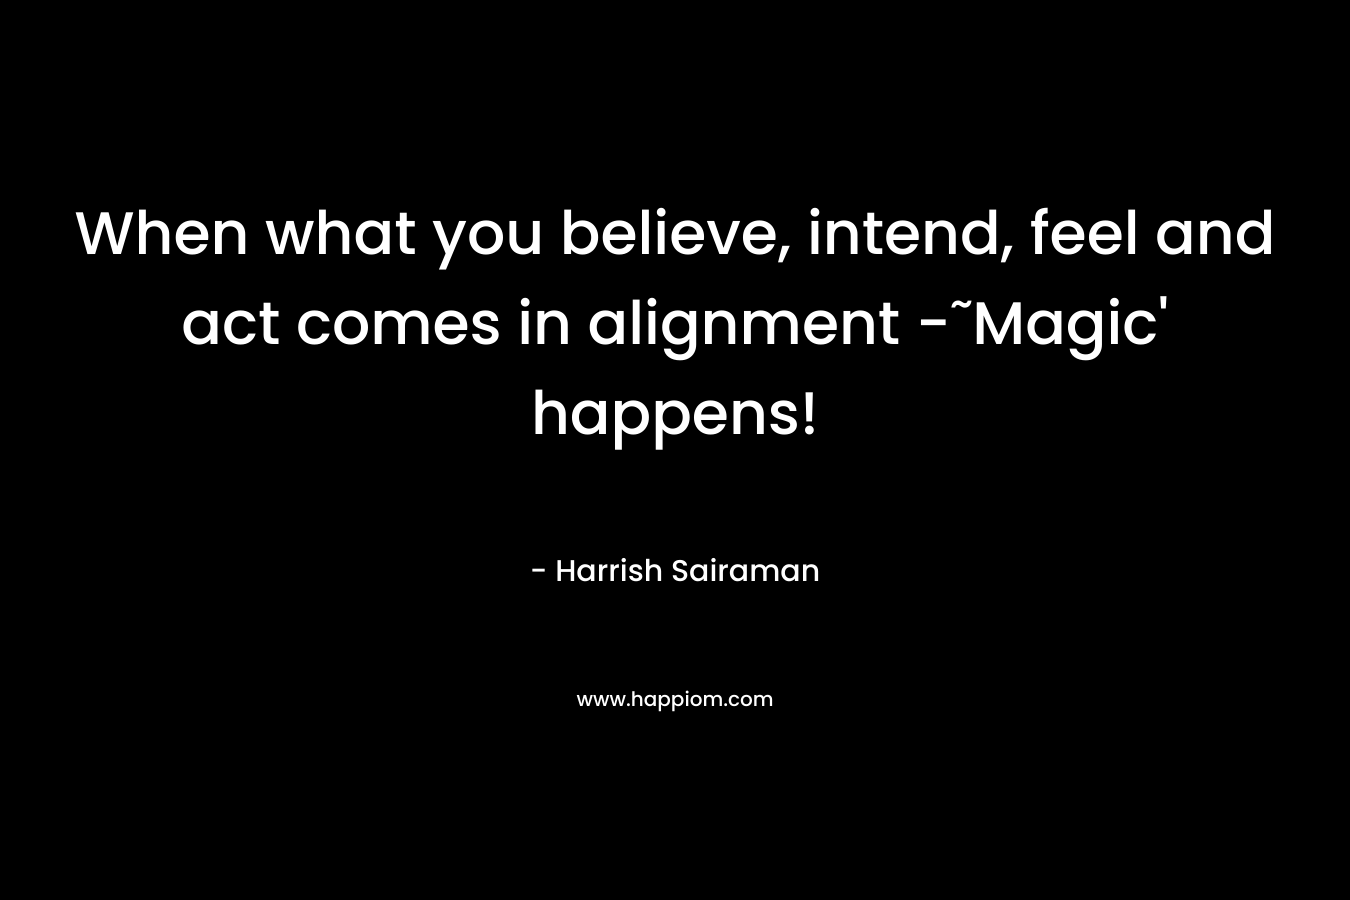 When what you believe, intend, feel and act comes in alignment -˜Magic’ happens! – Harrish Sairaman